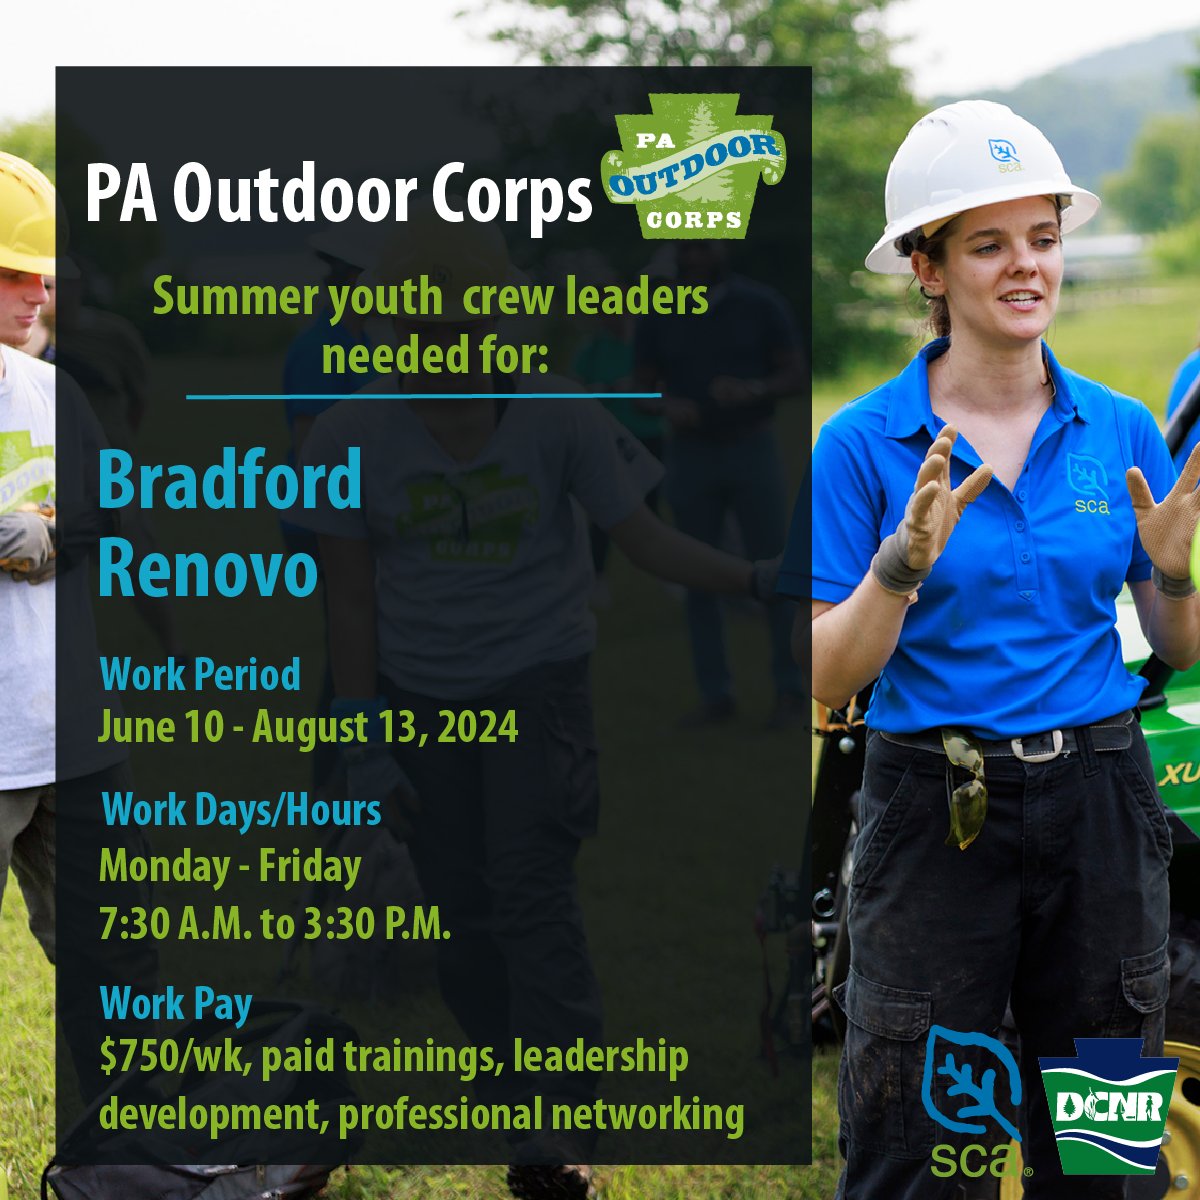 The #PaOutdoorCorps still needs crew leaders for its summer youth crews in these two areas in the #PaWilds! Applicants must be at least 21 years old and have had a driver’s license for at least 3 years. If interested, please contact vlauro@thesca.org as soon as possible.